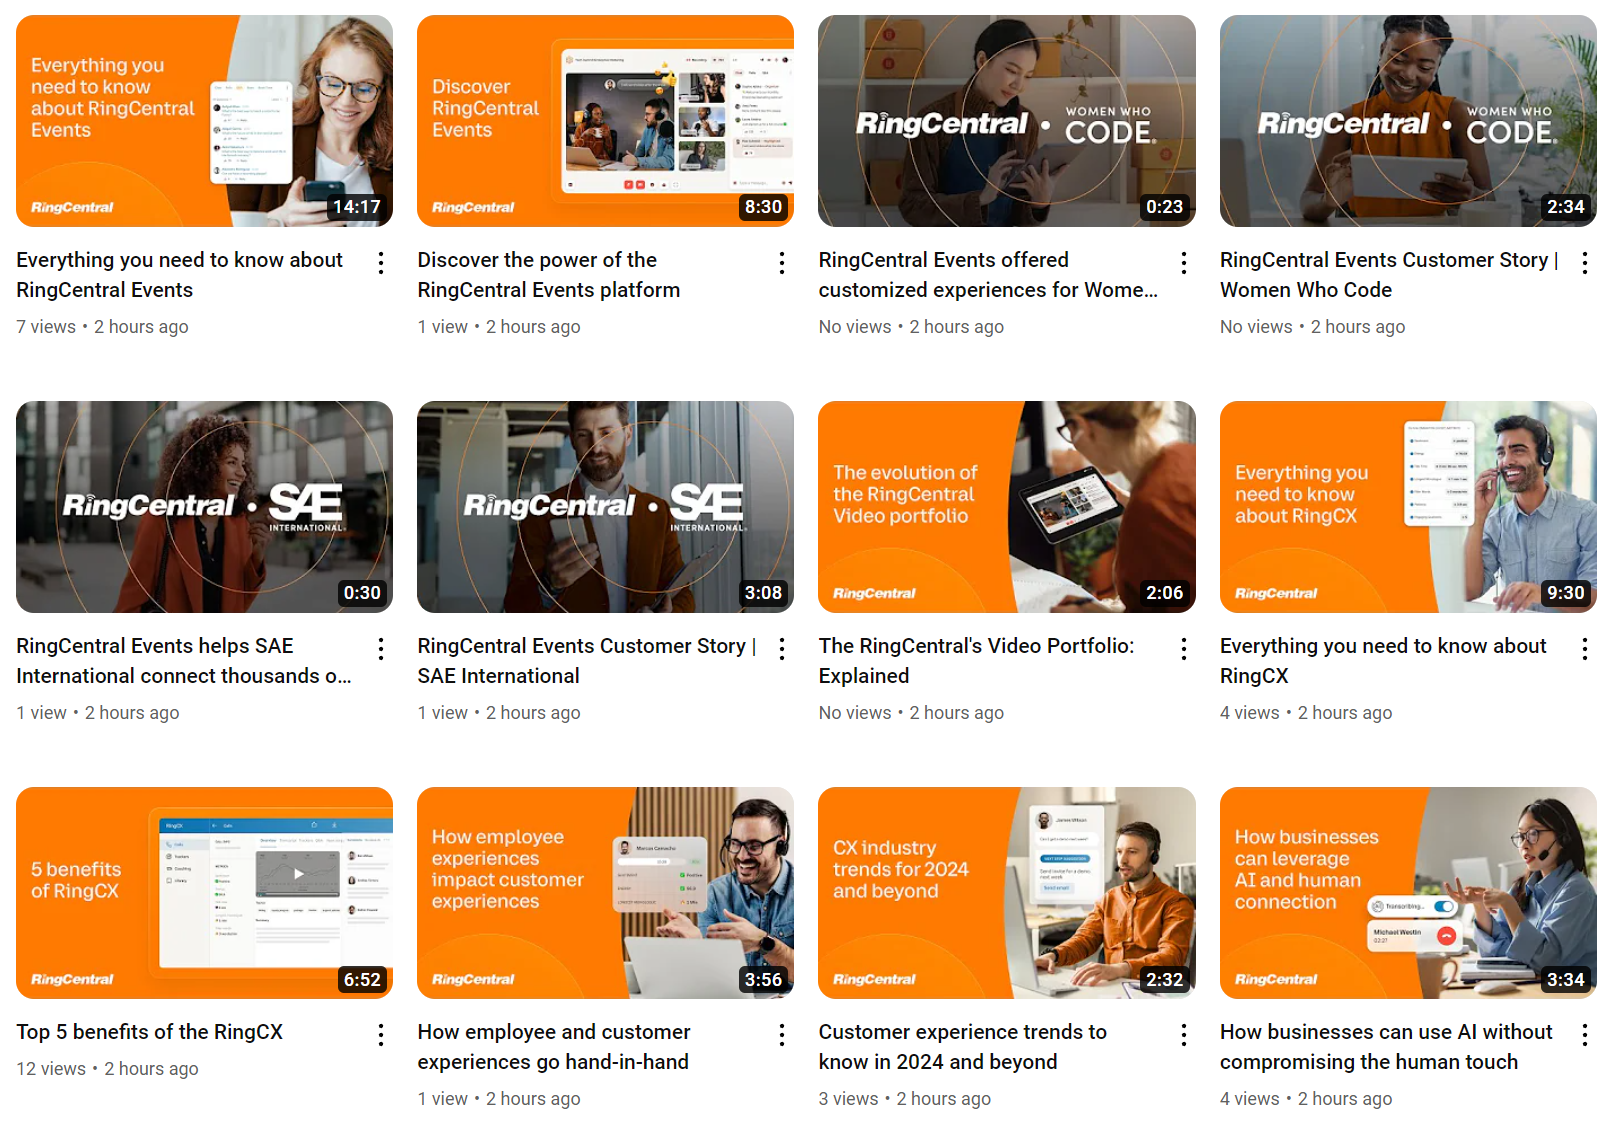 Ringcentral's videos on YouTube